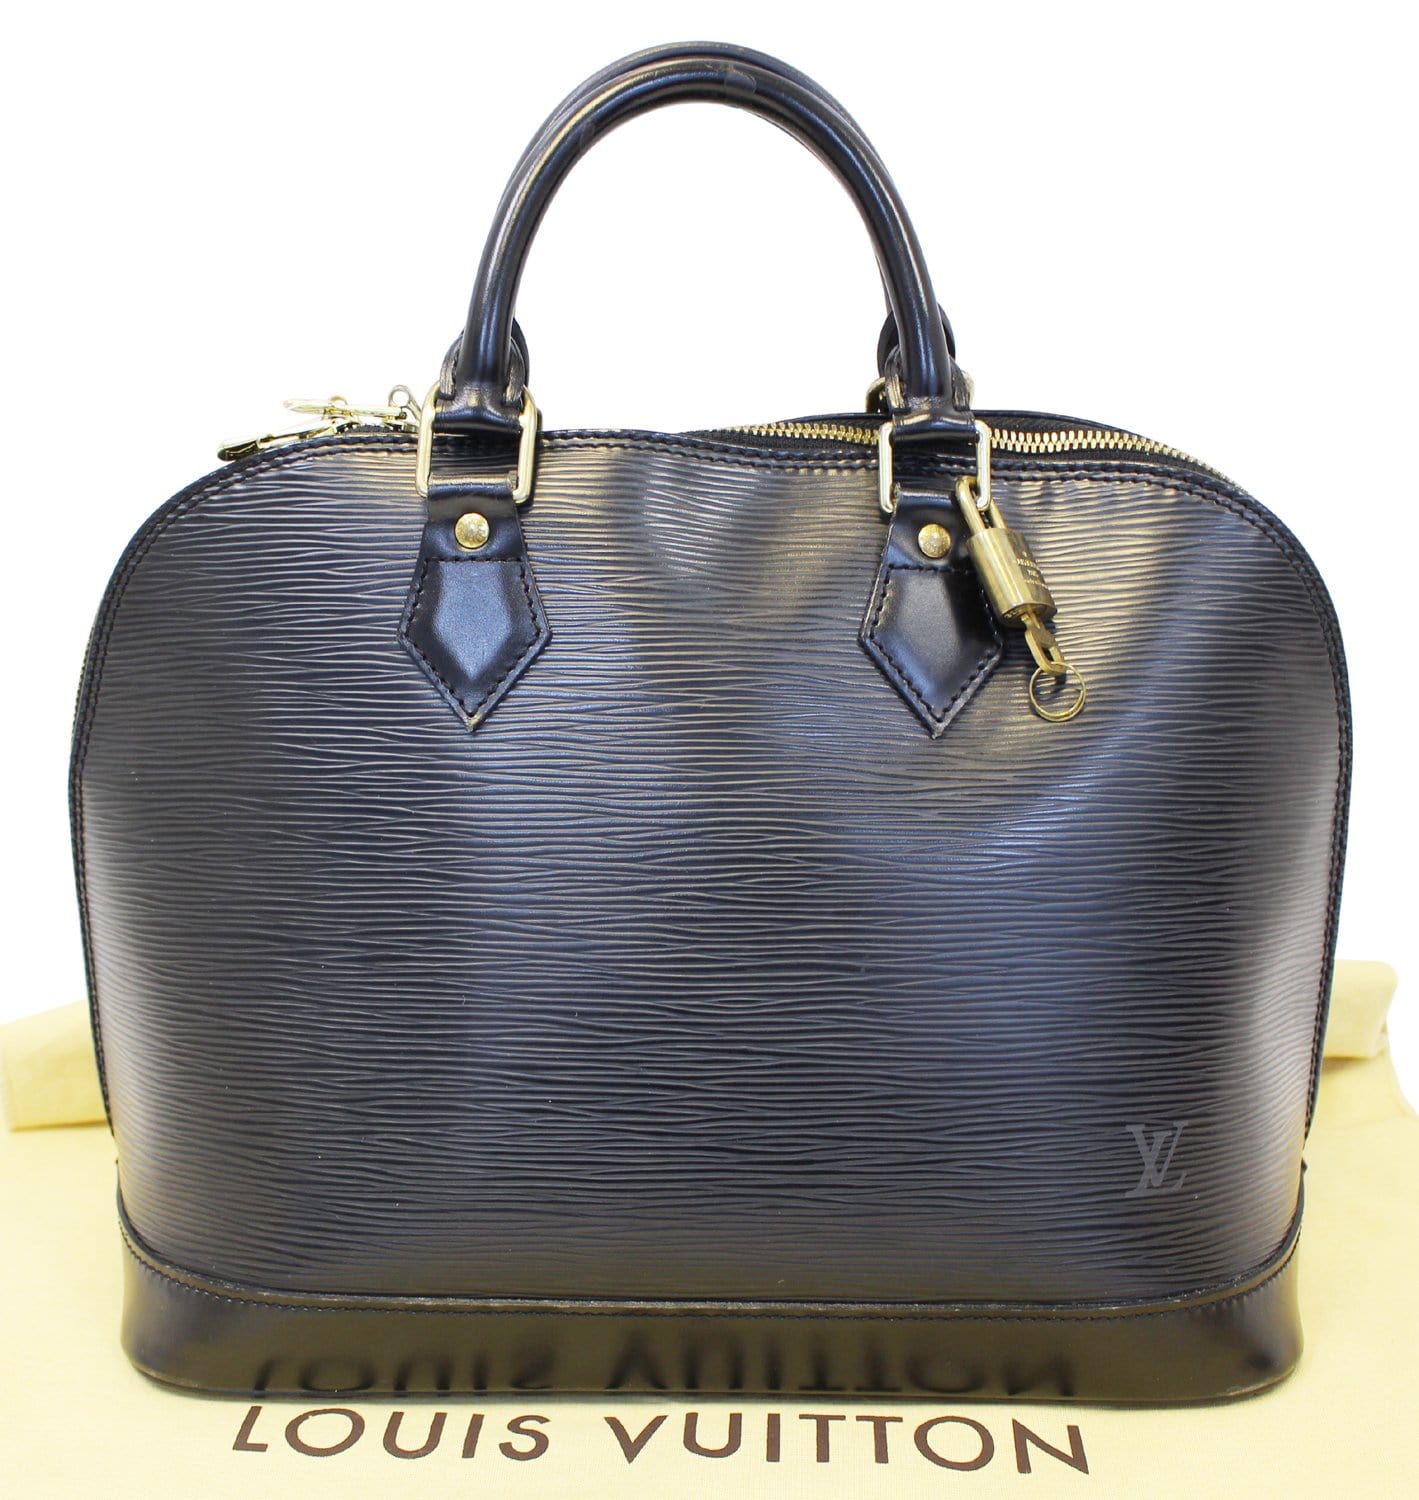 Green Louis Vuitton Alma bag. The perfect size and shape for everyday.  Louis  vuitton handbags black, Louis vuitton bag, Cheap louis vuitton bags